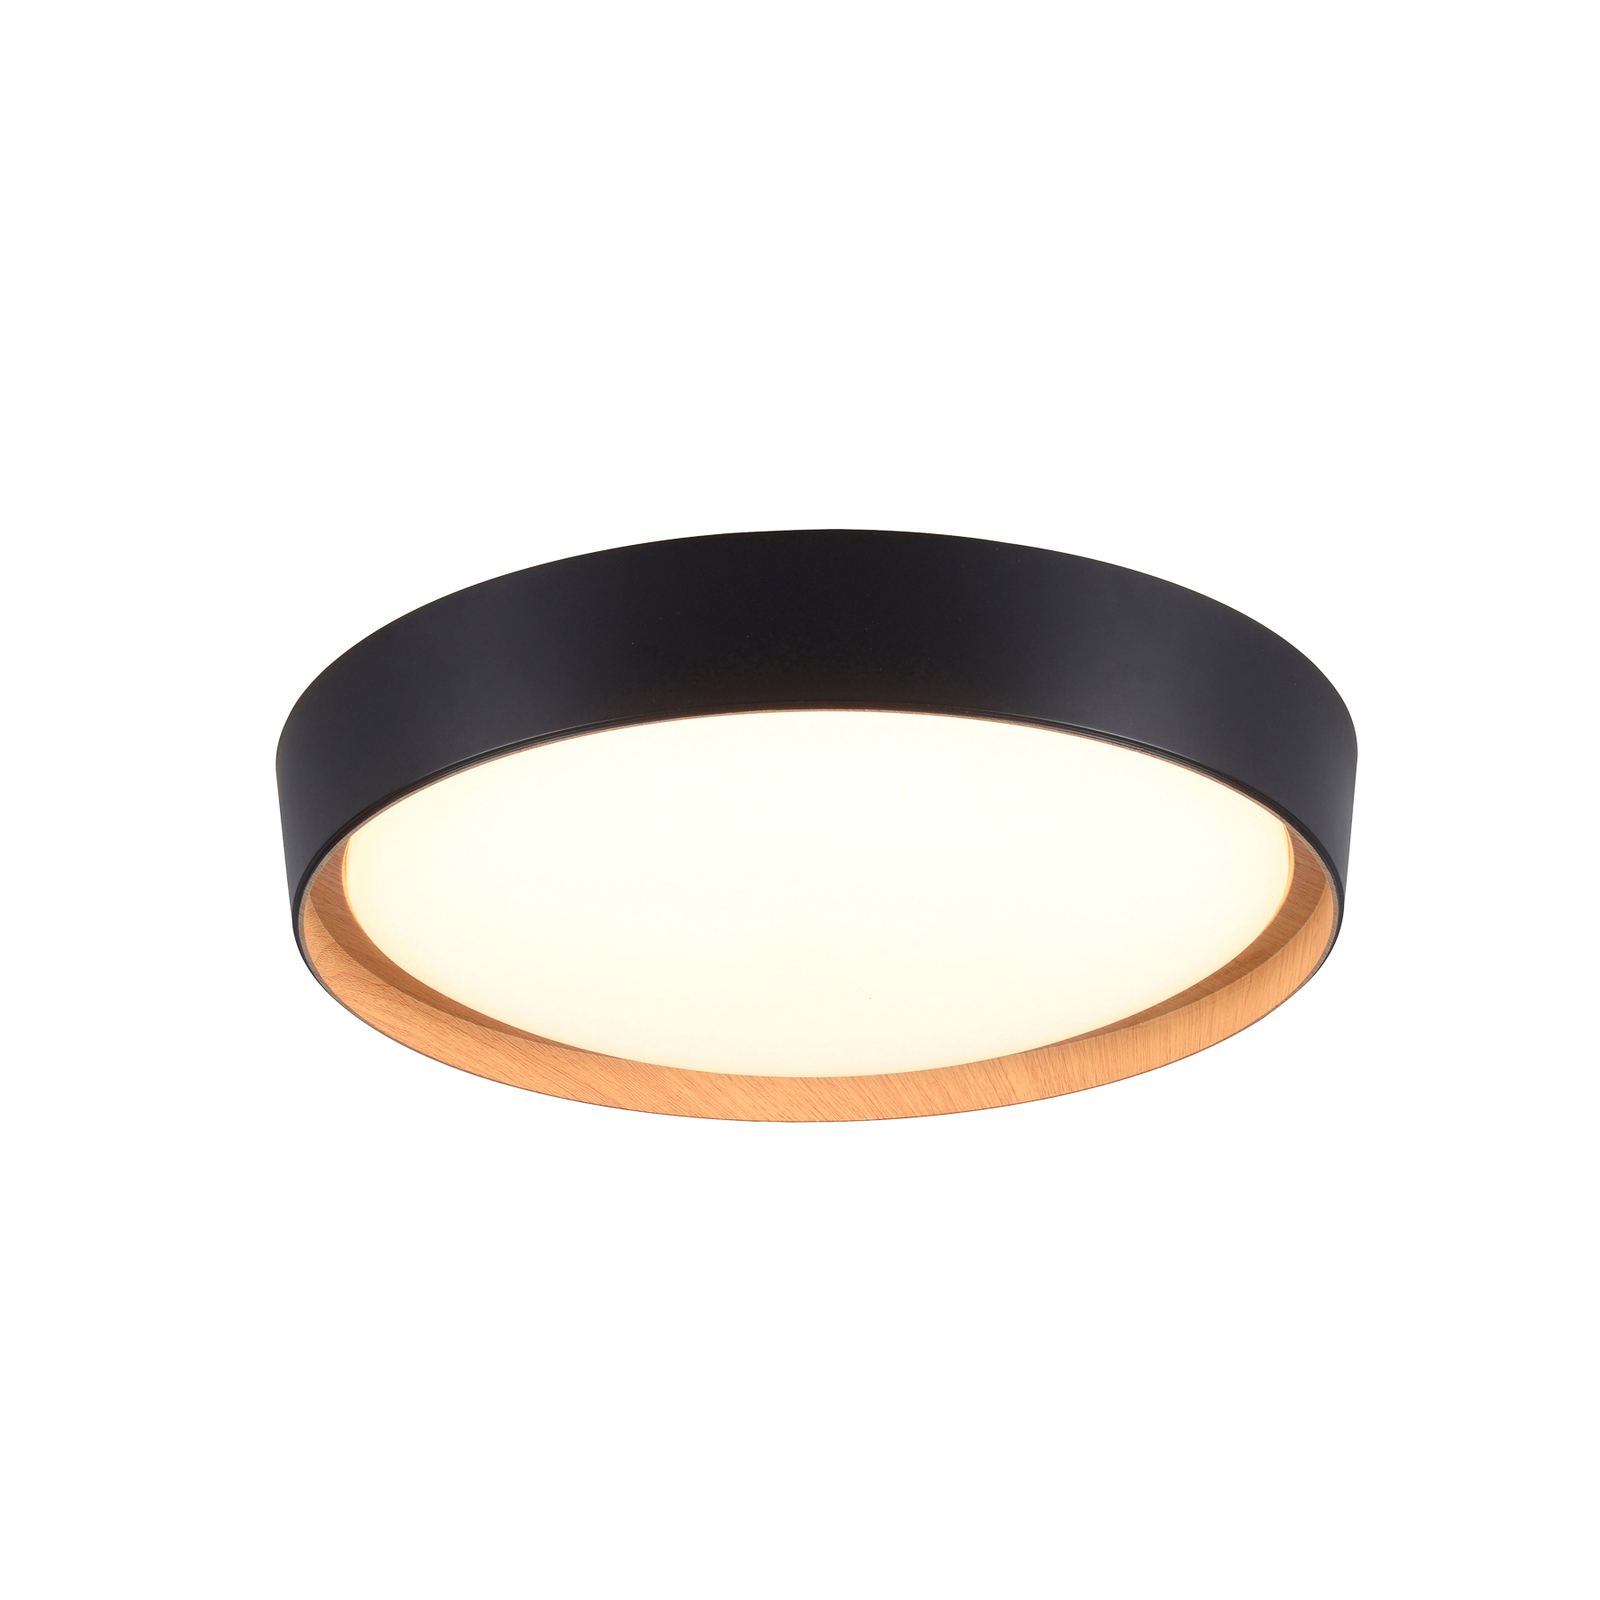 LED ceiling light Emilia 3-stage dimmable black